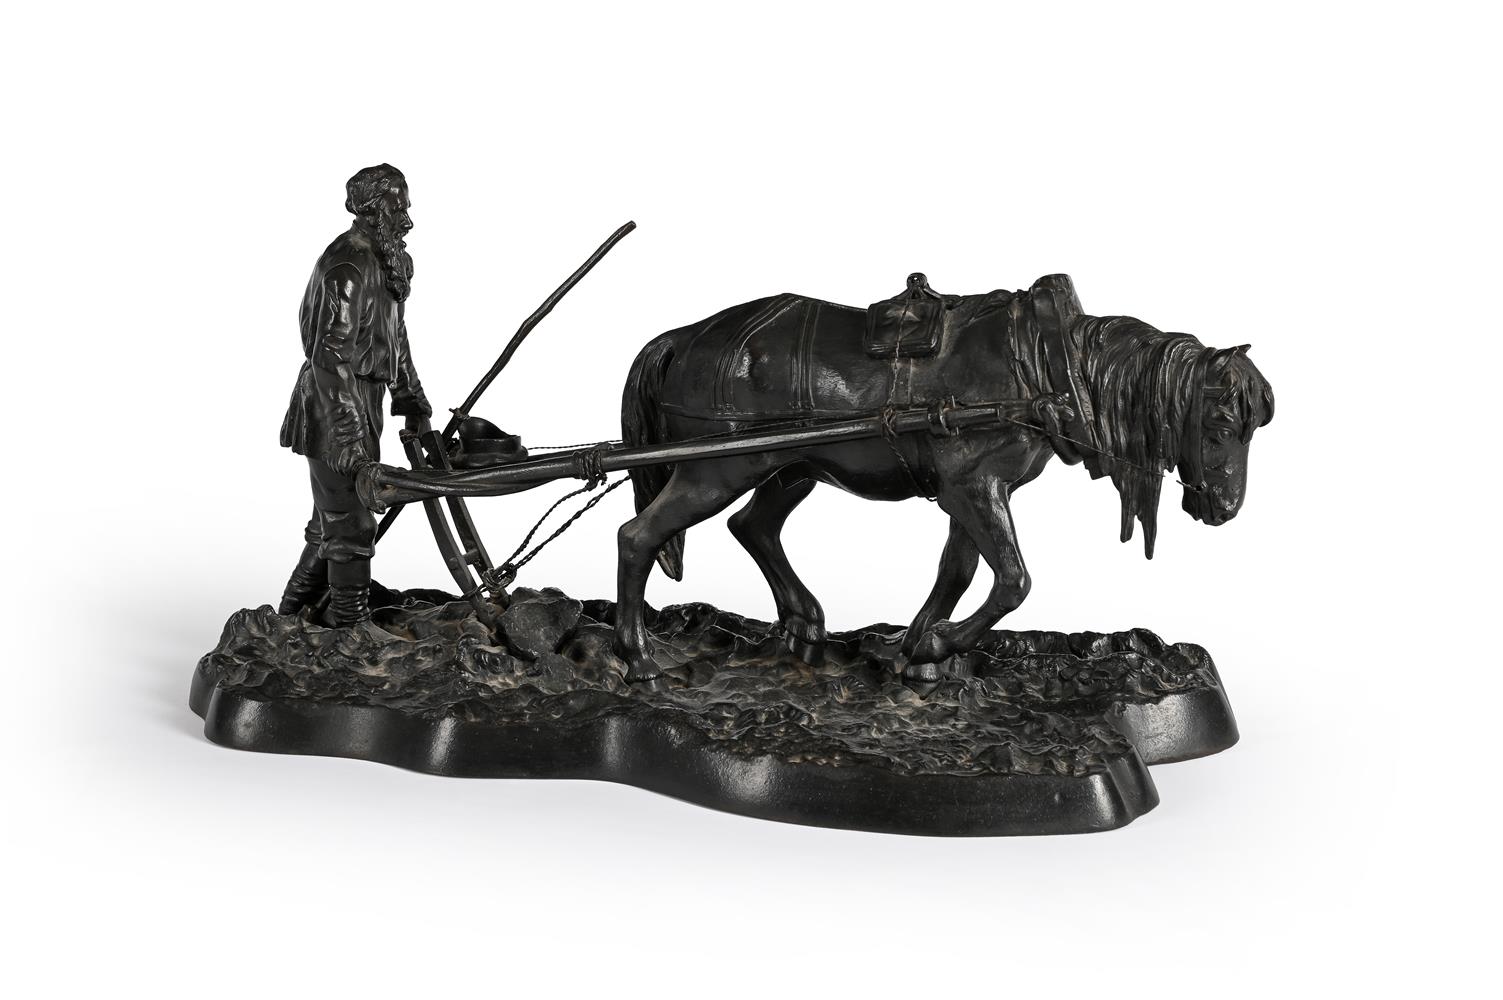 CAST FROM THE MODEL BY ALEXANDRA ANDREEVNA SOLOVYEVA, THE PLOUGHMAN - Image 5 of 6